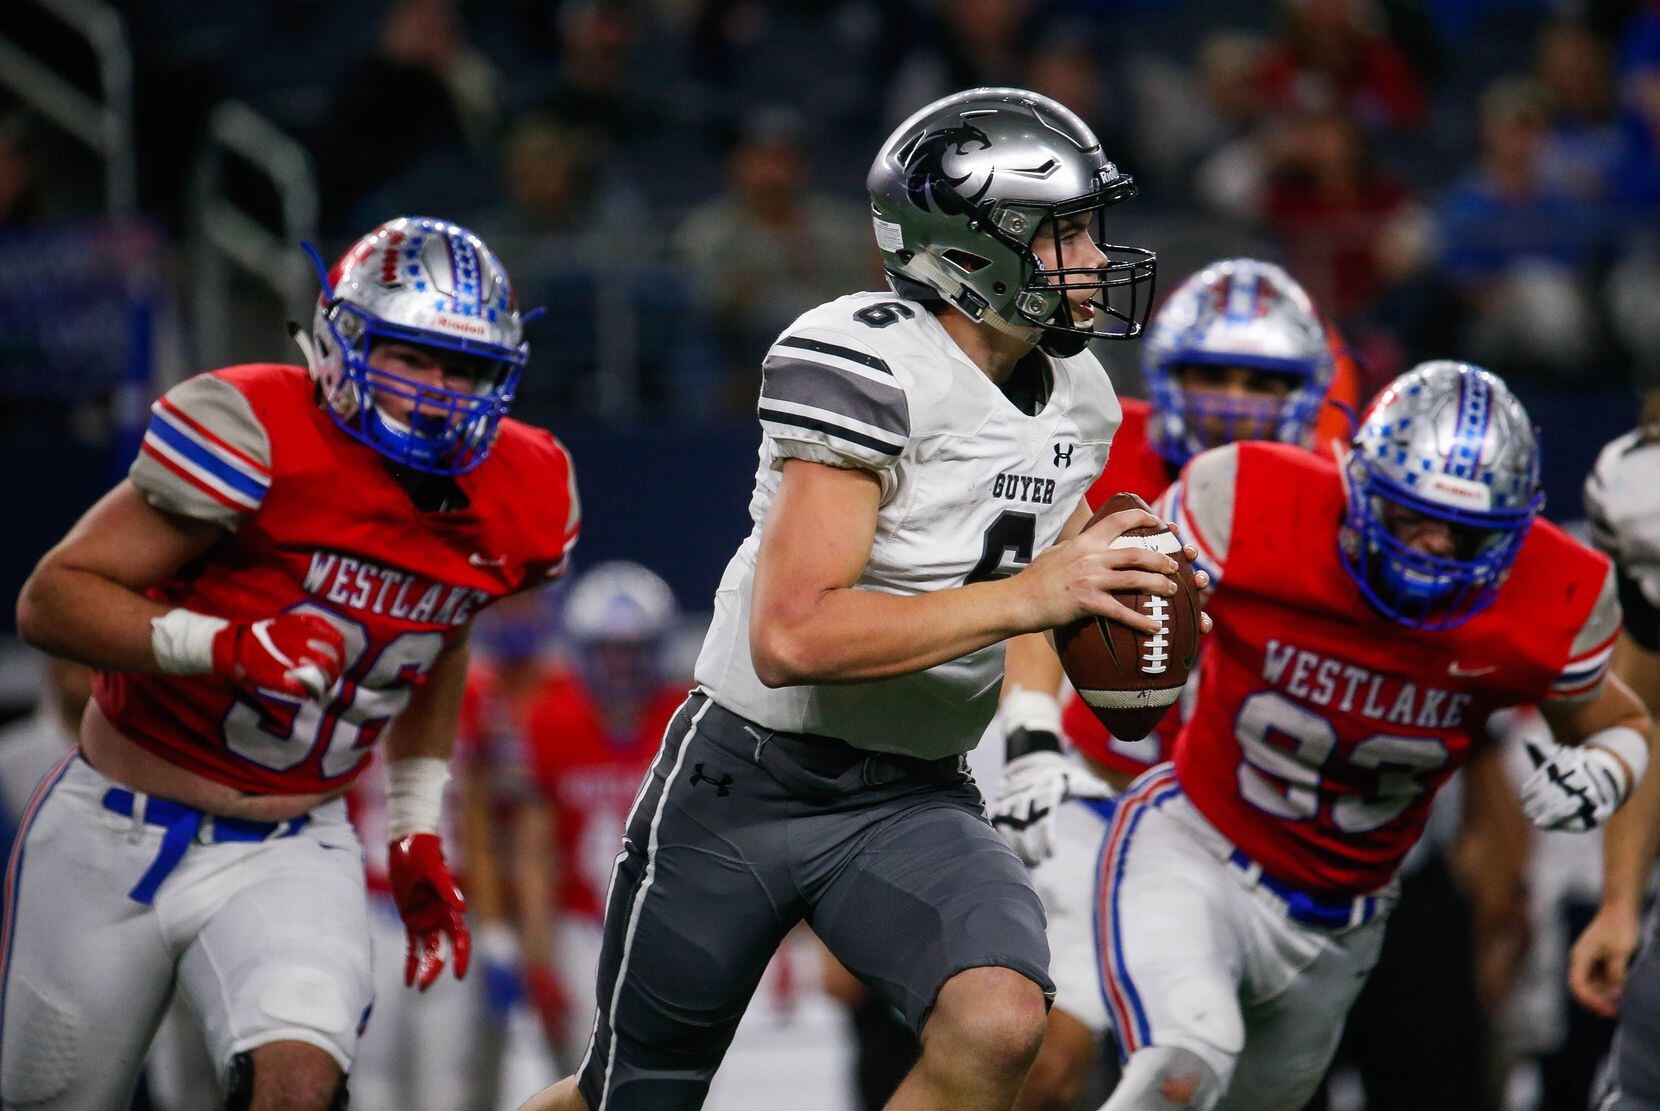 Denton Guyer's QB Jackson Arnold (6) is followed by Westlake's defense in the fourth quarter...